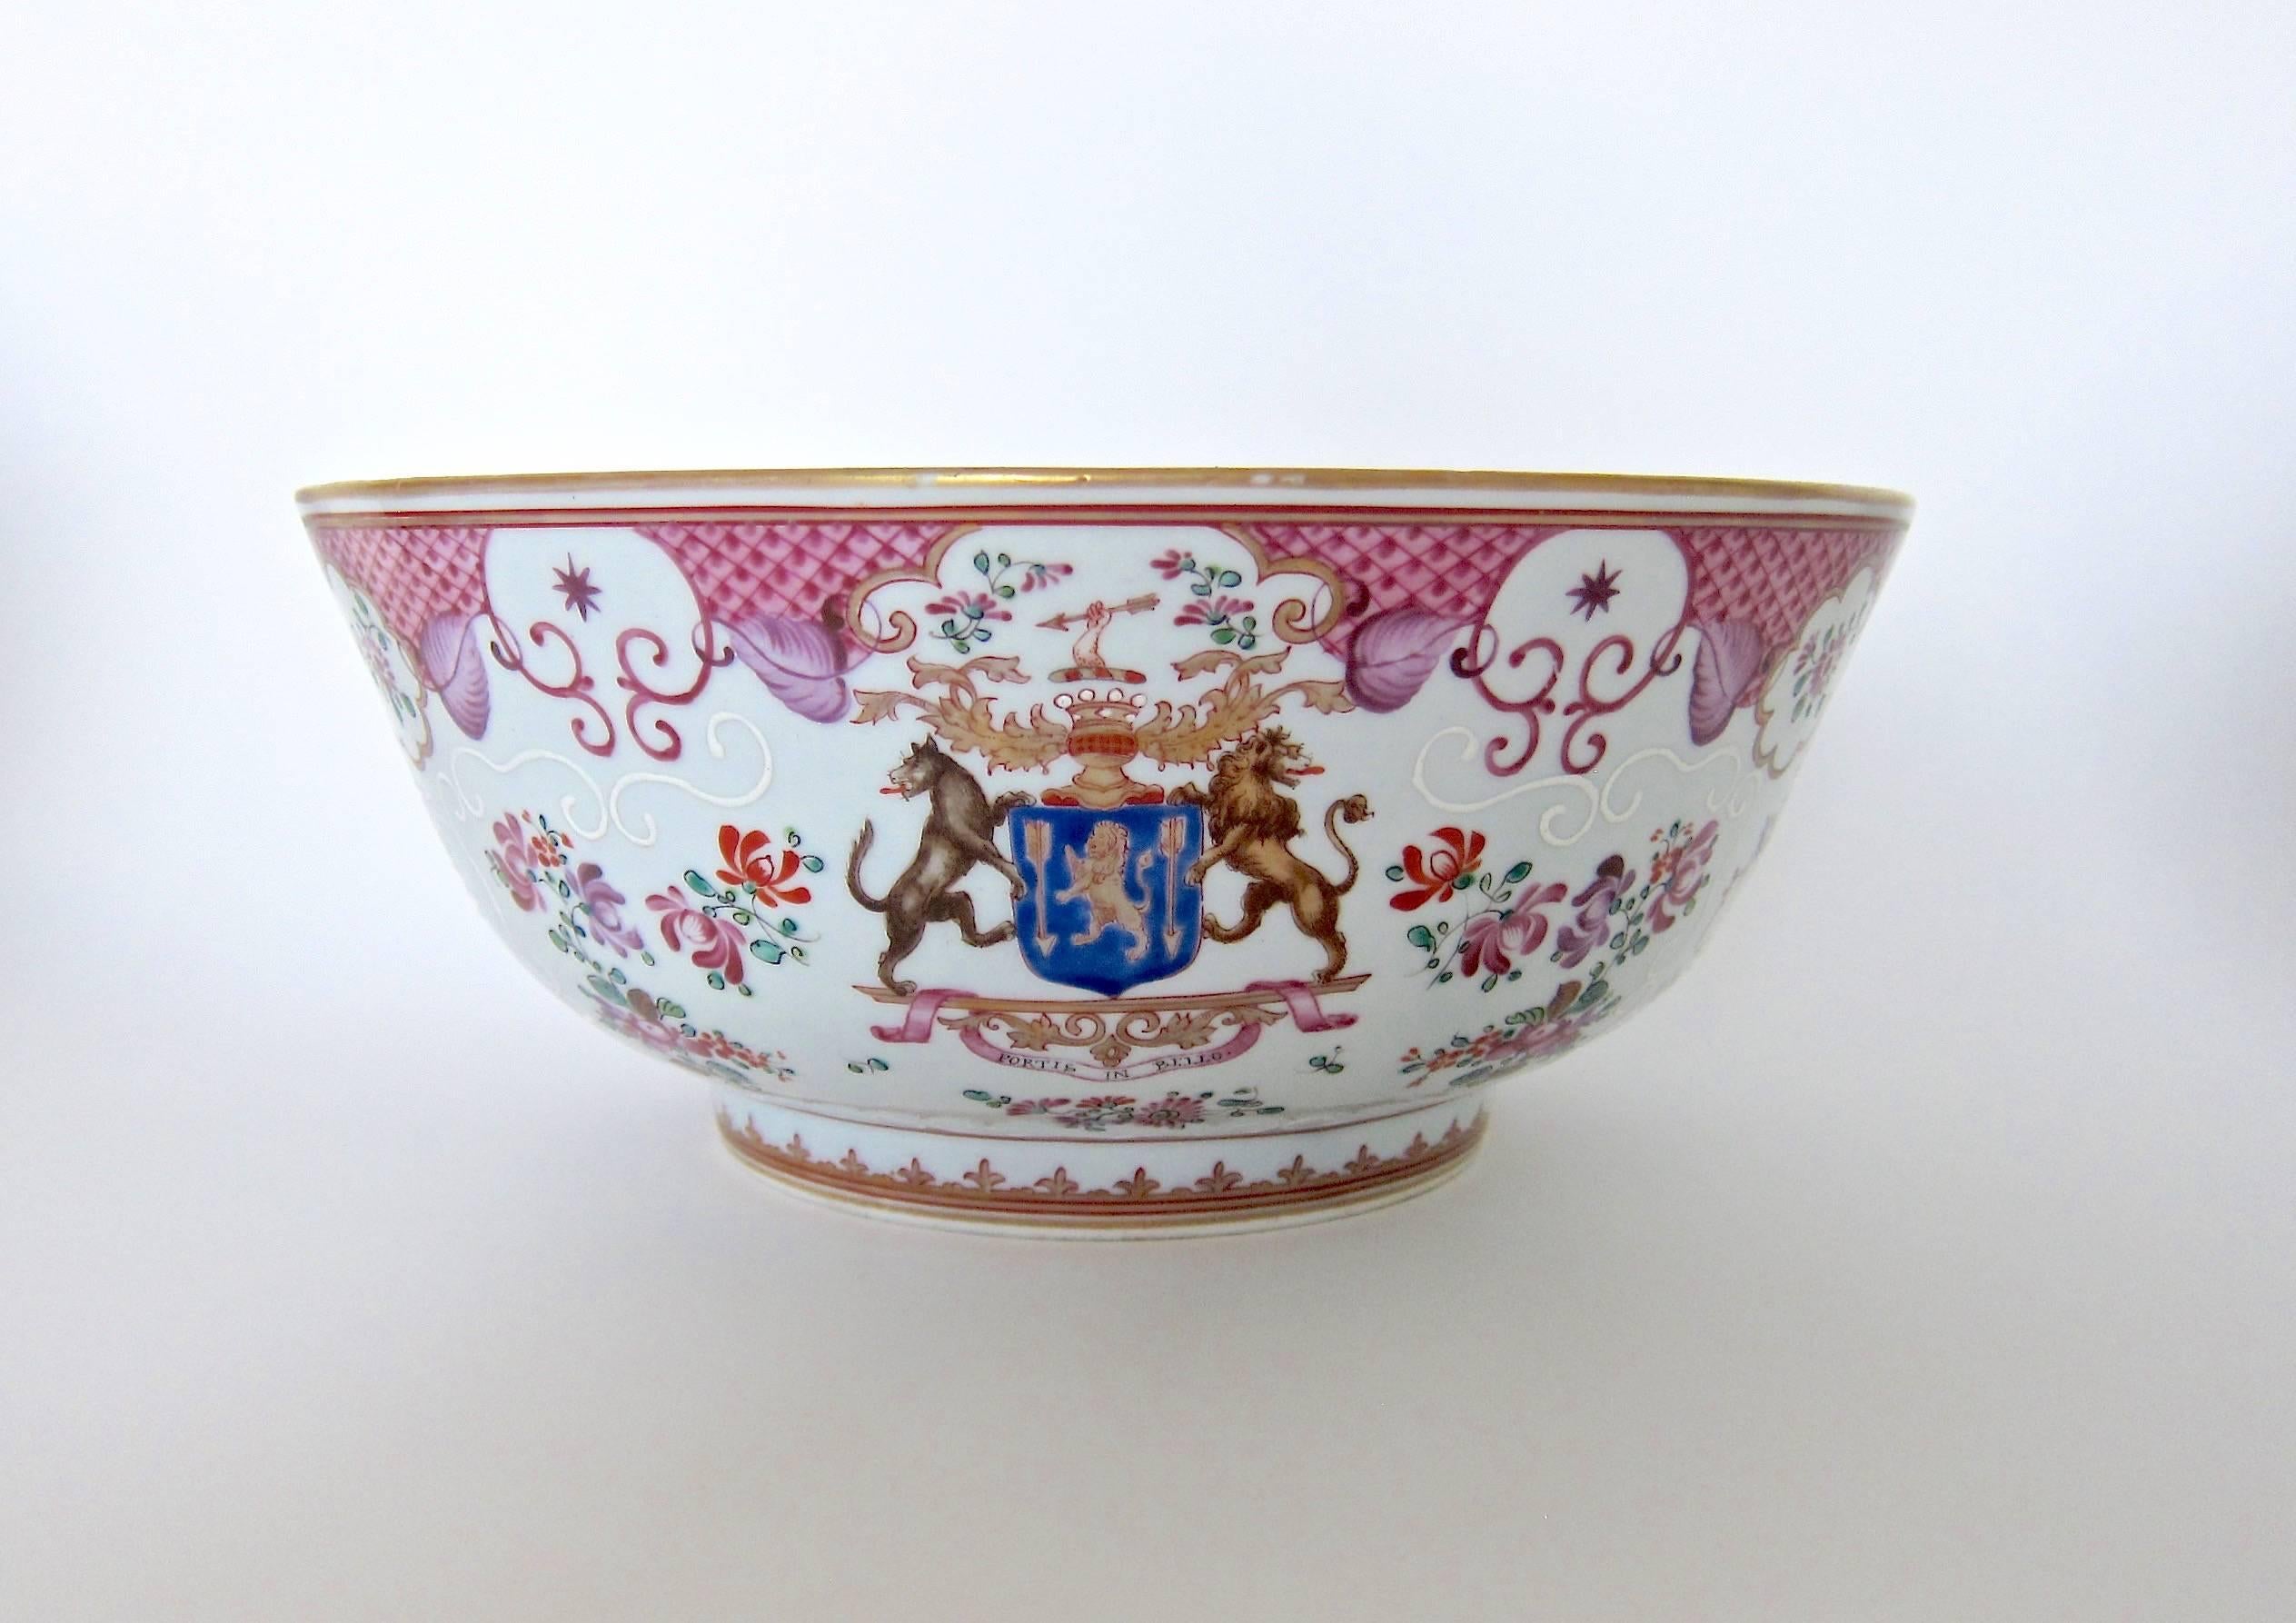 Enameled Chinese Export Armorial Style Porcelain Punch Bowl by Samson, Late 19th Century